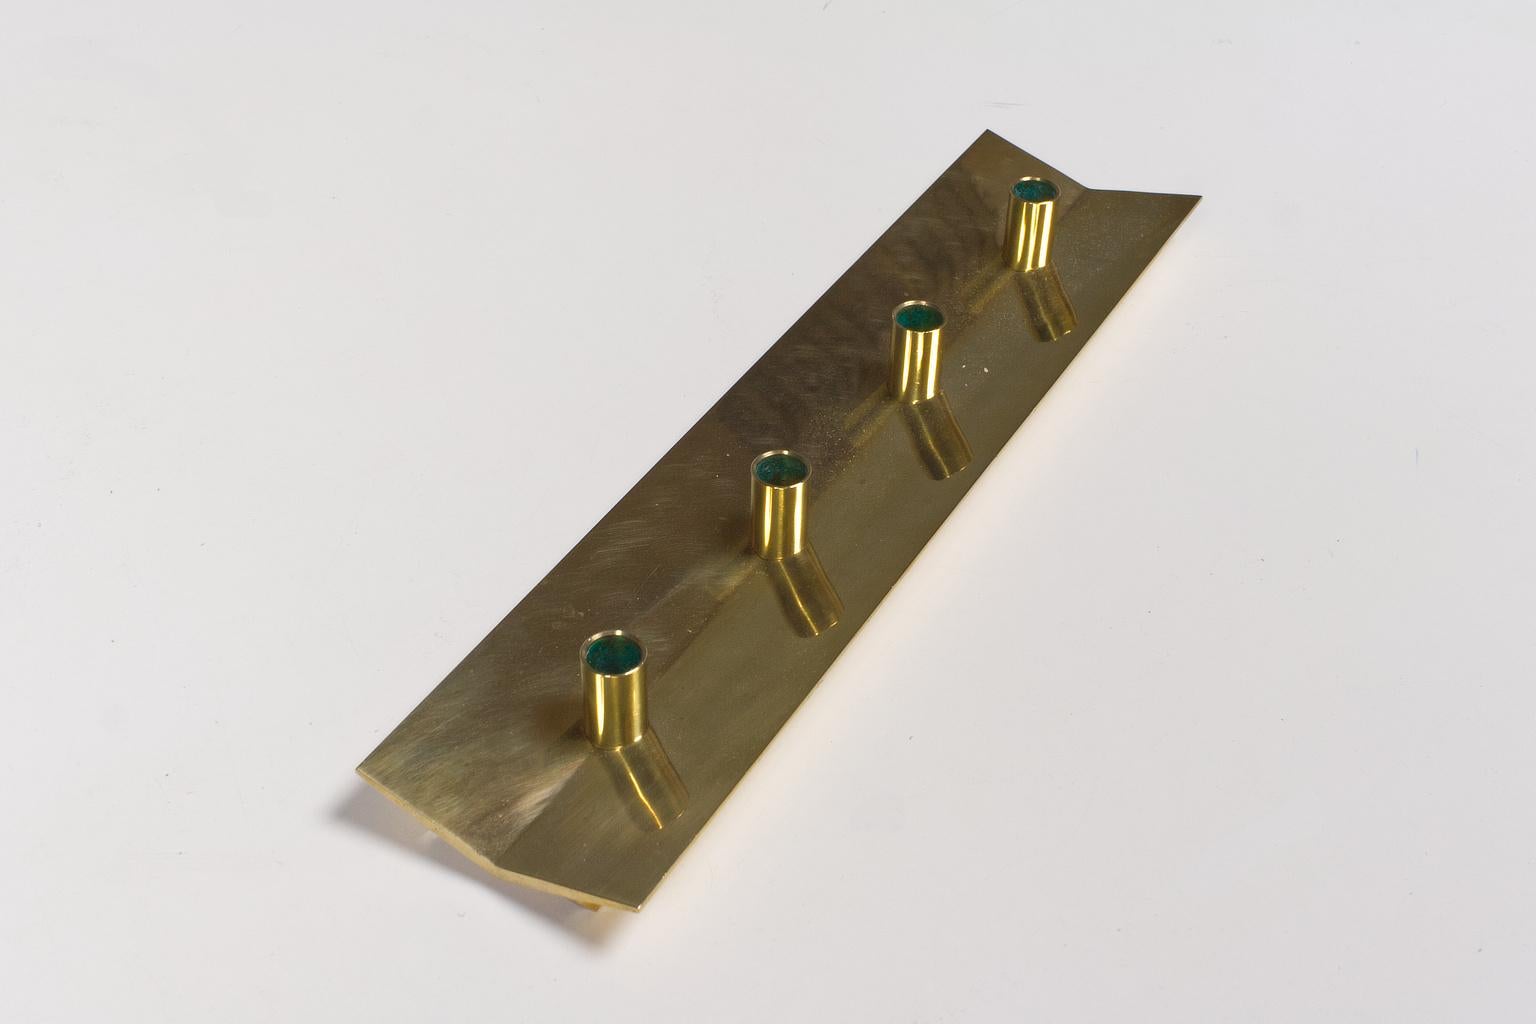 Swedish vintage candleholder in brass featuring 4 small sized (12/13mm / 0.5 inch) candle holders. This pieces was designed by Pierre Forssell for Skultuna Sweden, late 1950s-beginning of the 1960s. Mark brand present. This model no. 69 is made of